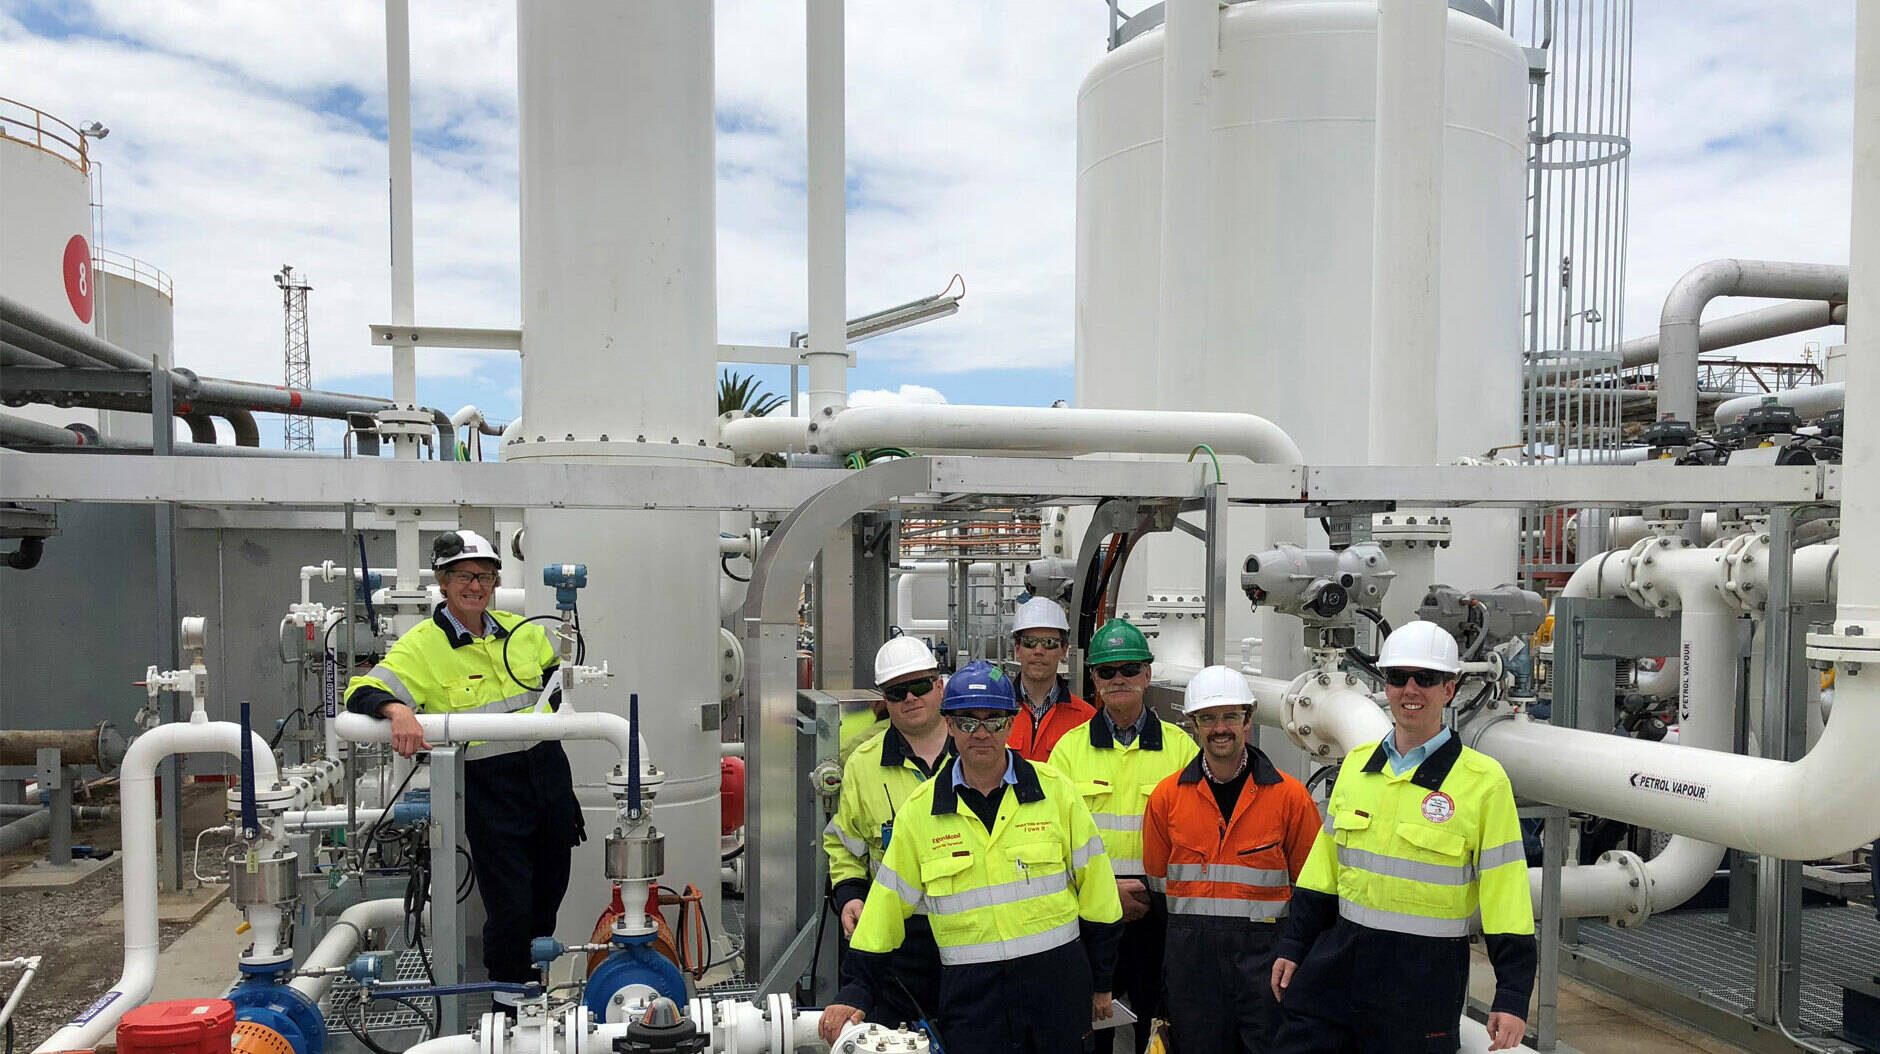 Image Photo — “Yarraville Terminal now operates with a reduced environmental footprint and an increased ability to service Australia’s growing fuel needs.”